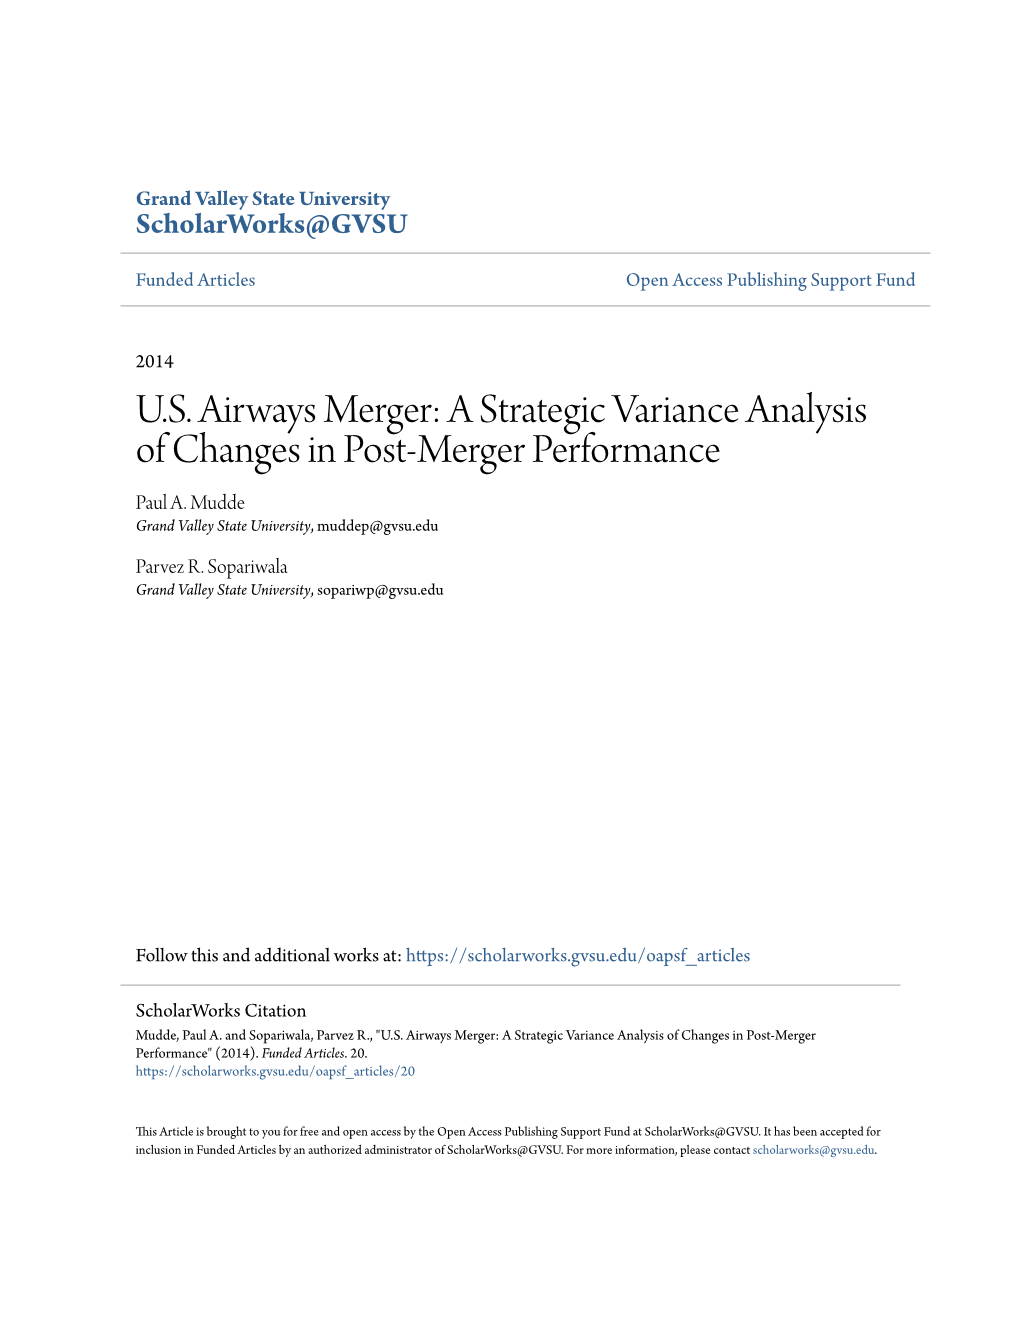 A Strategic Variance Analysis of Changes in Post-Merger Performance Paul A